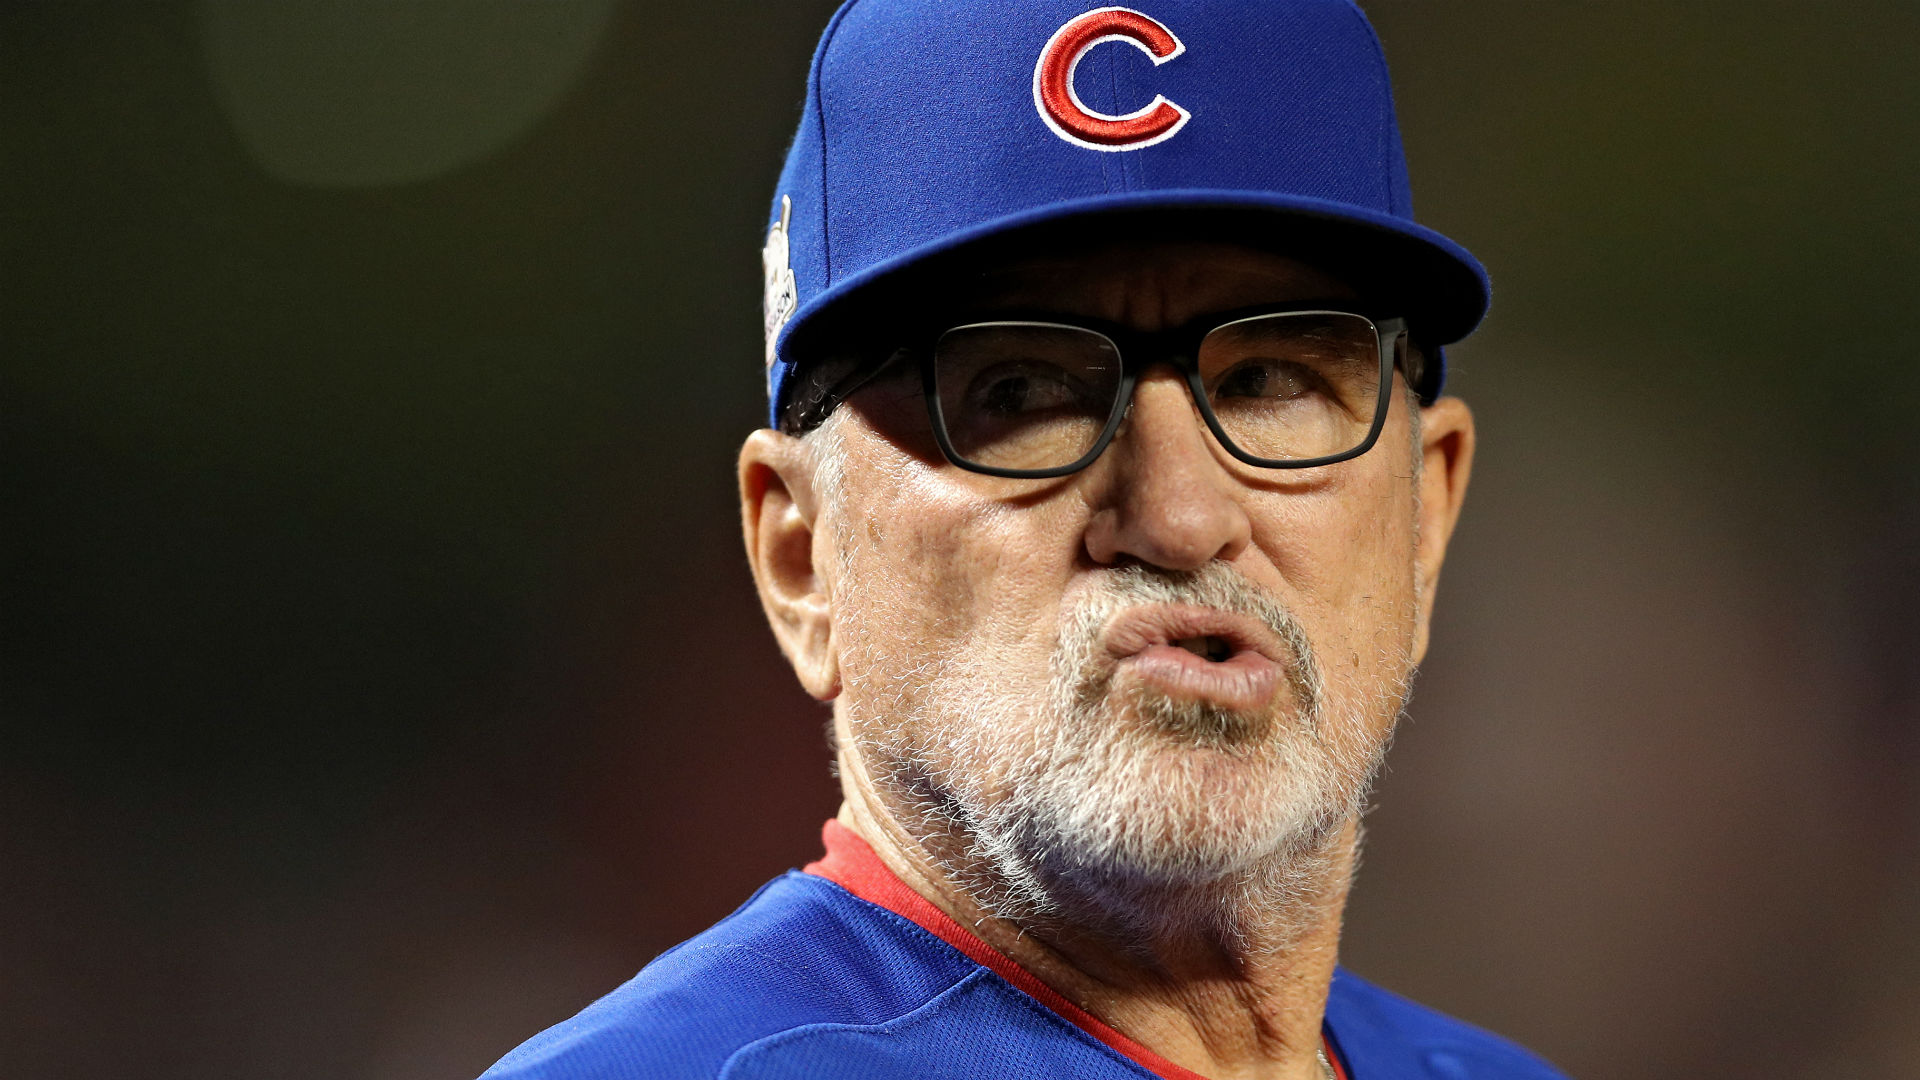 The Cubs announced last week that Maddon would not return for 2020 after his contract expired at the end of this season.